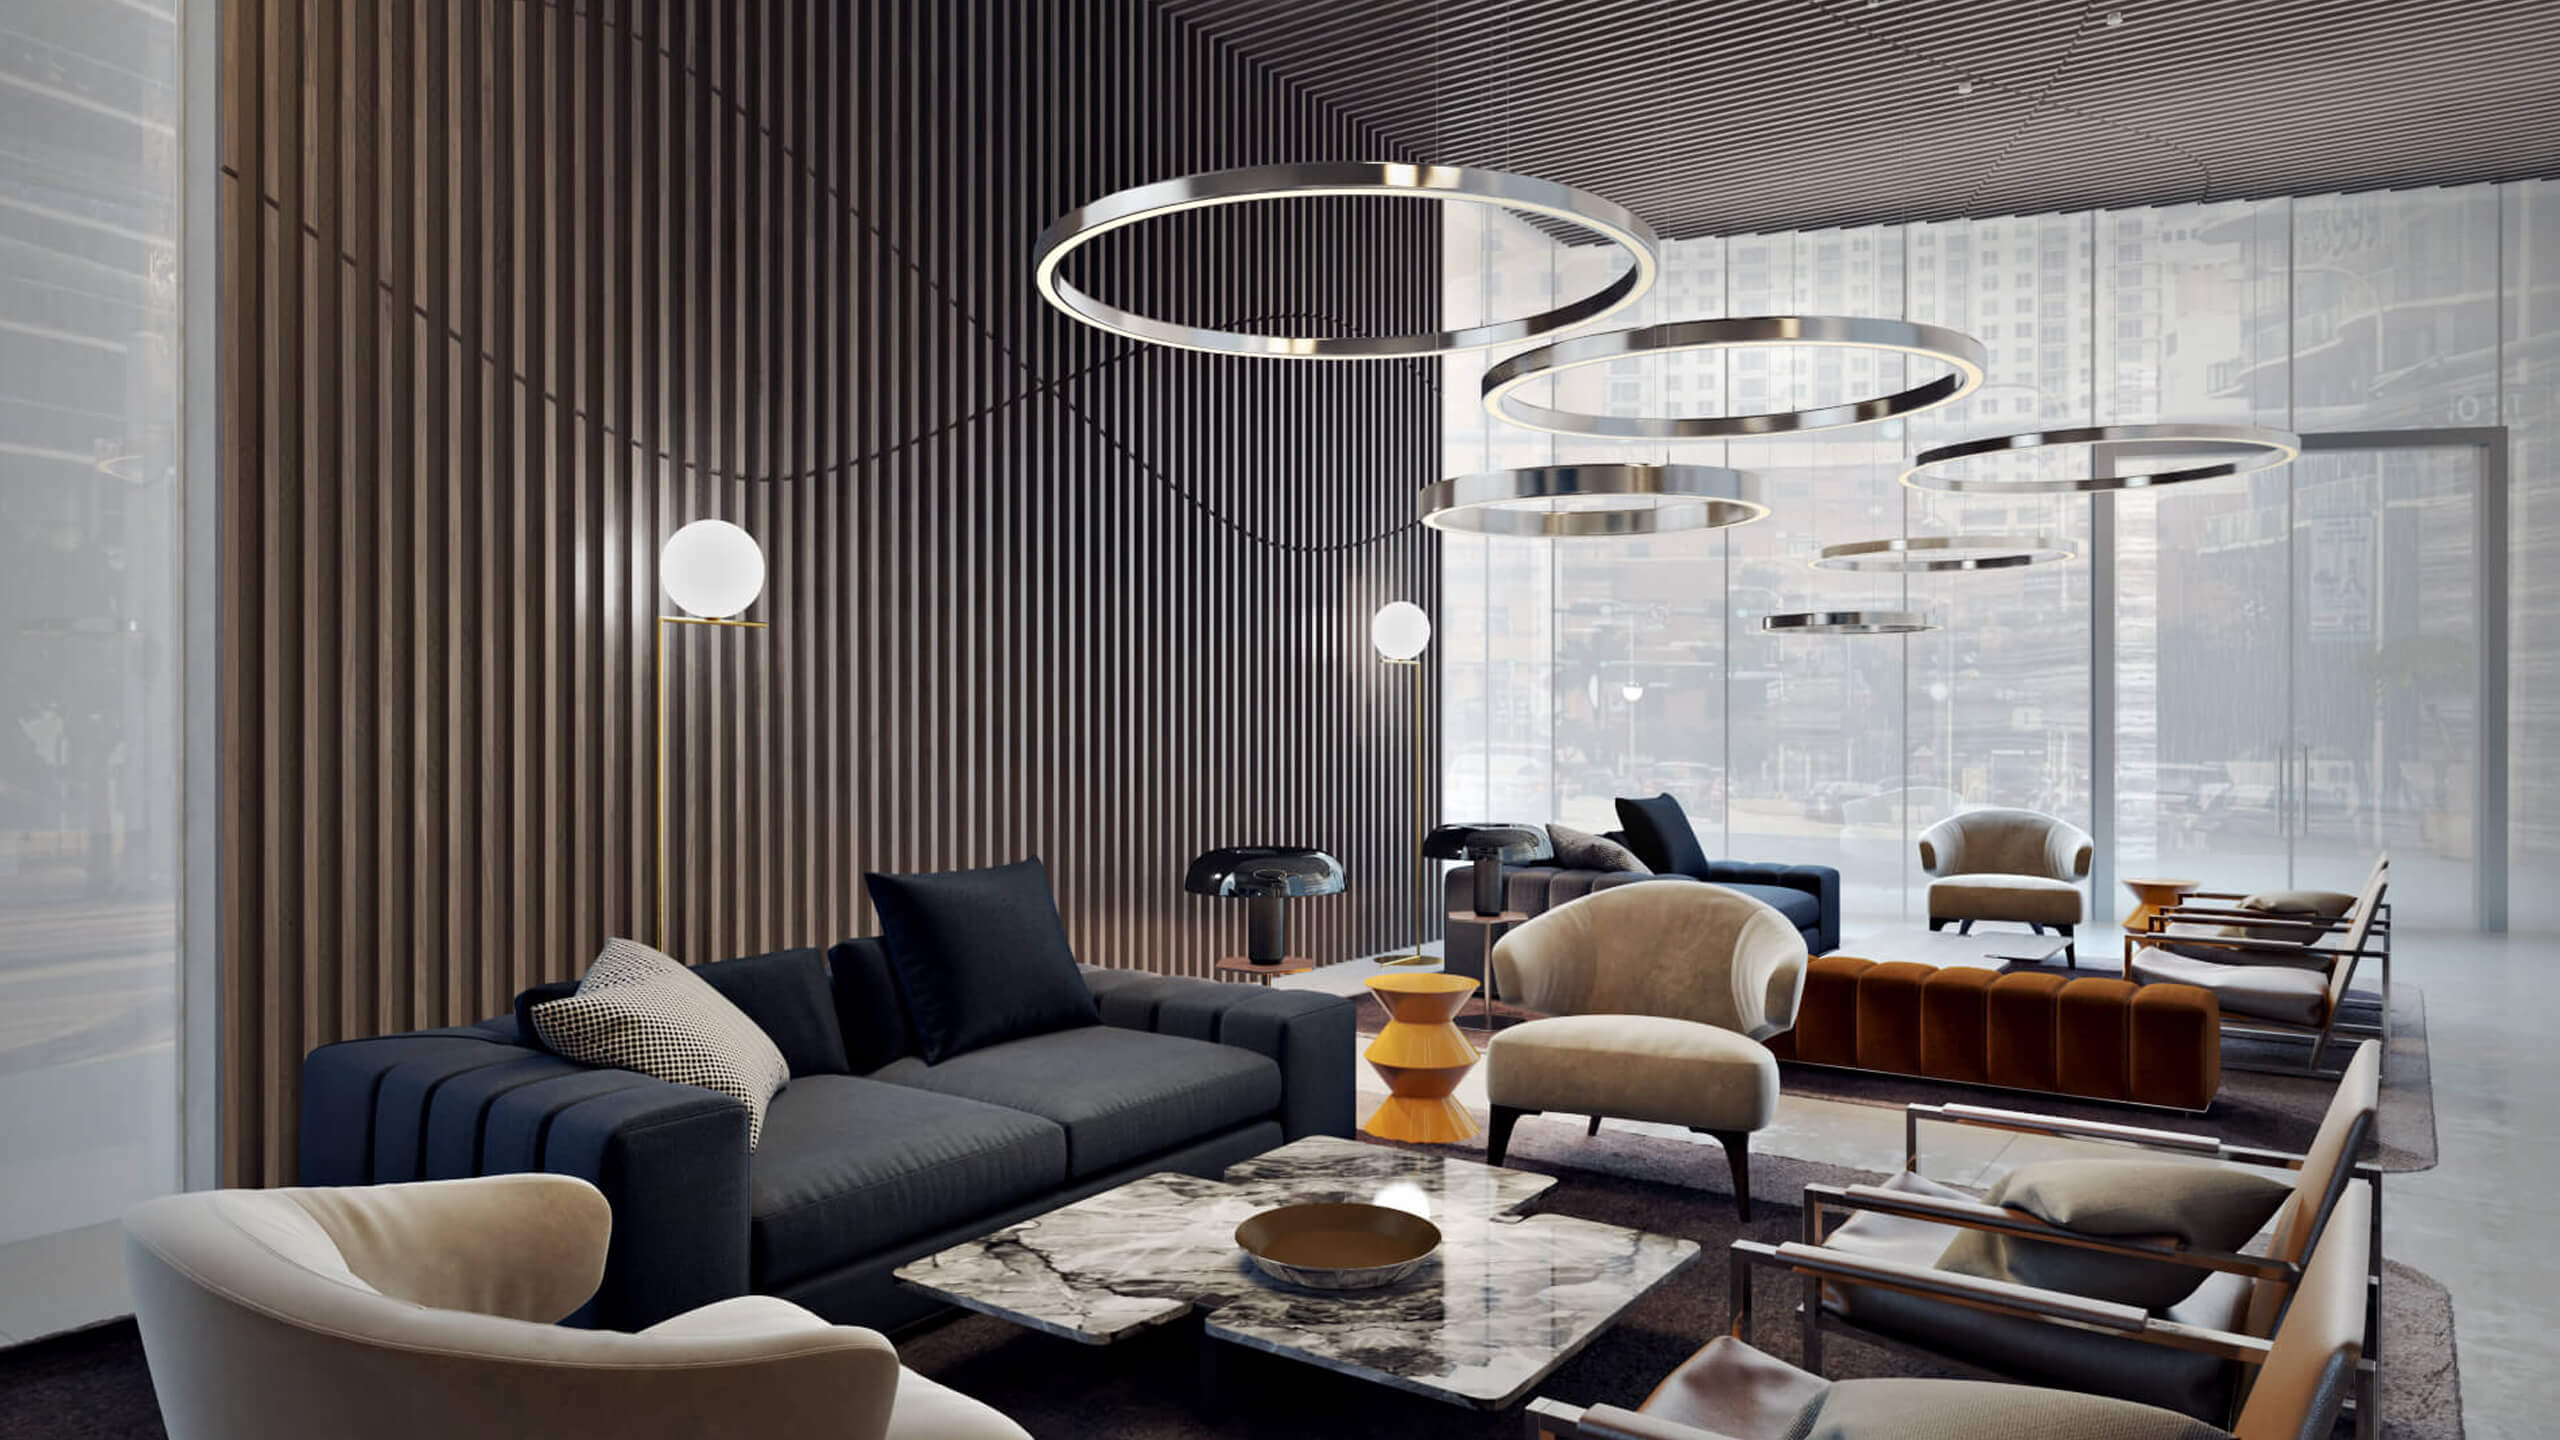 3D Rendering of Hotel Lounge Area